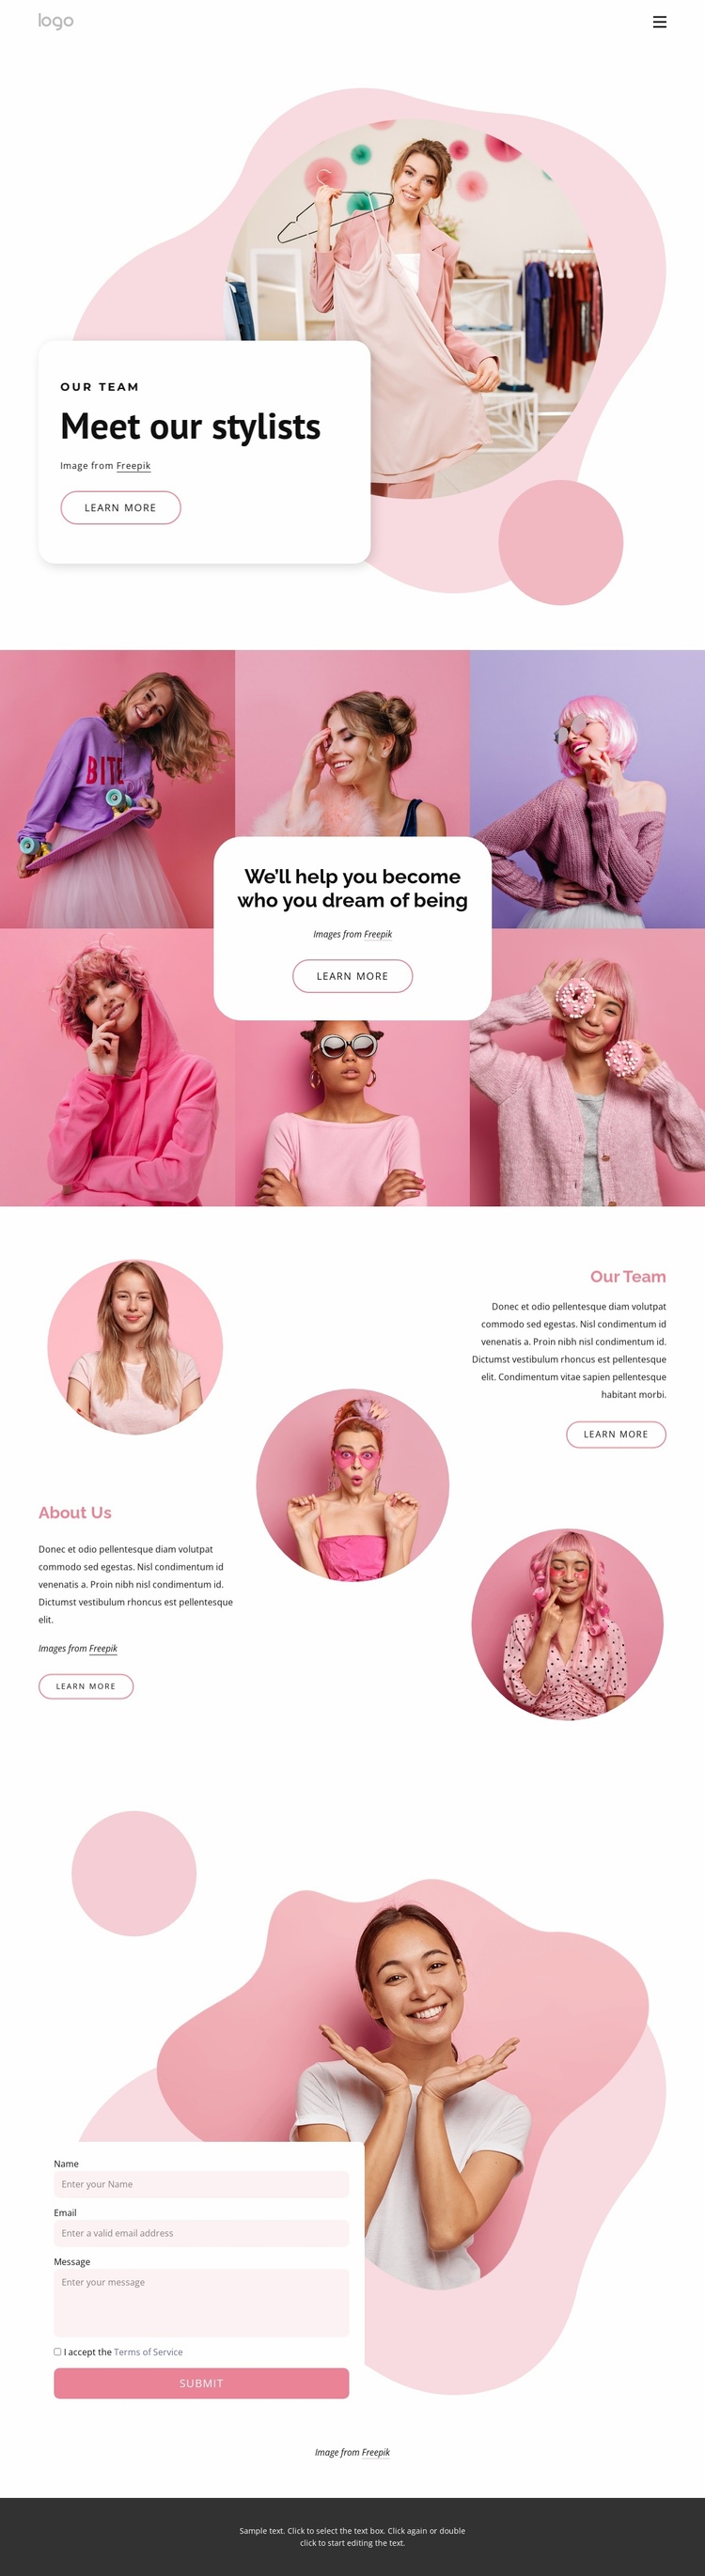 Meet our stylists Landing Page